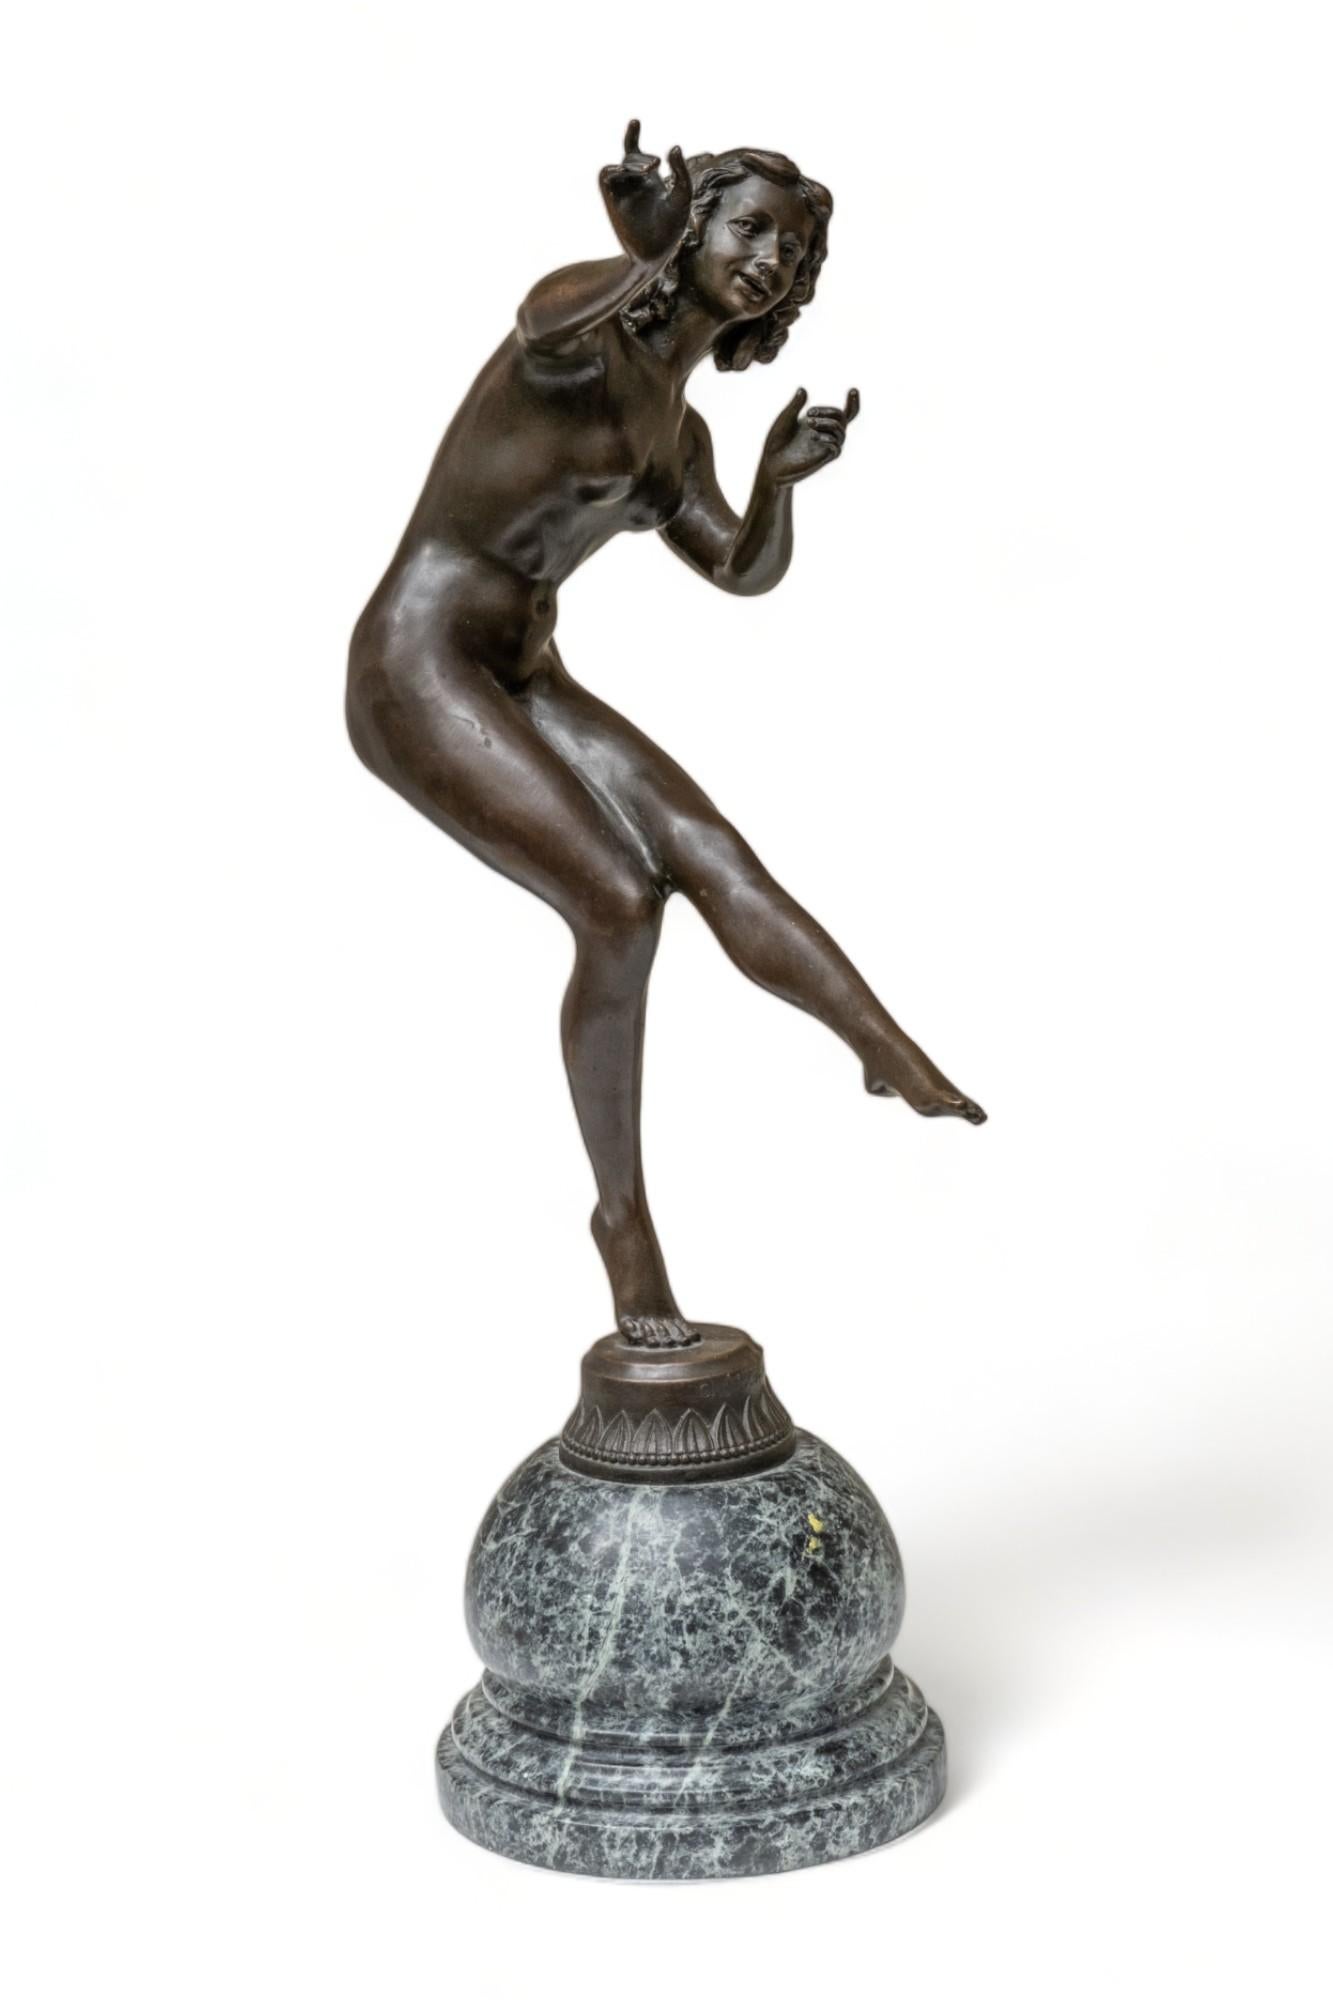 Claire Colinet signed Early 20th Century Bronze Sculpture on marble plinth
Claire Colinet was a Belgian-born sculptor, who worked primarily in the early 20th century. She is often recognized for her exquisite Art Deco figures, typically produced in